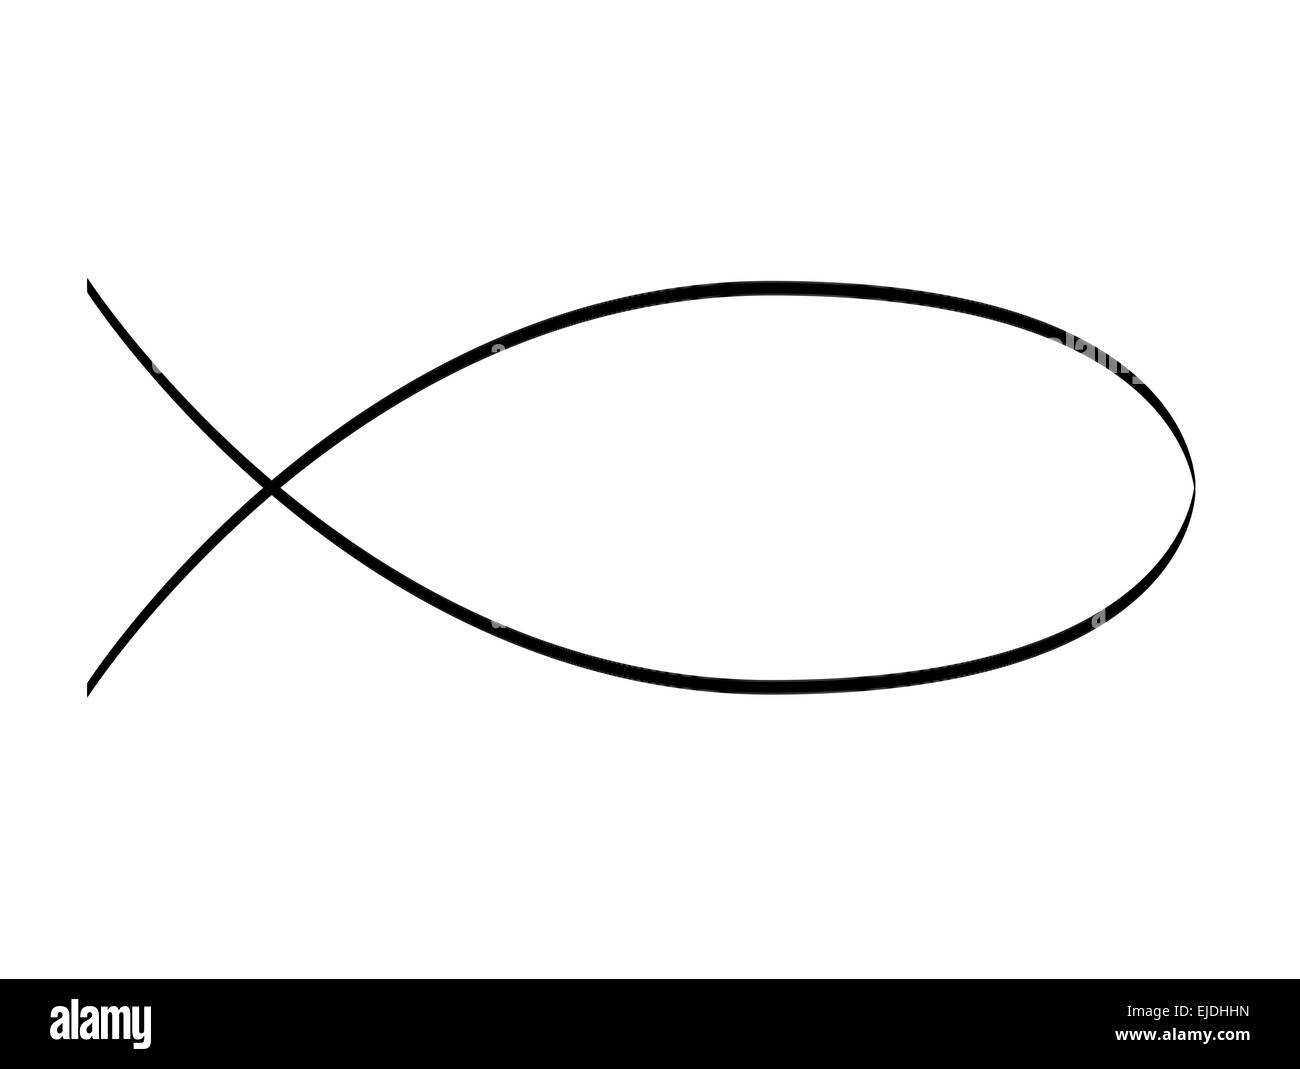 schematic drawing of jesus fish Stock Photo